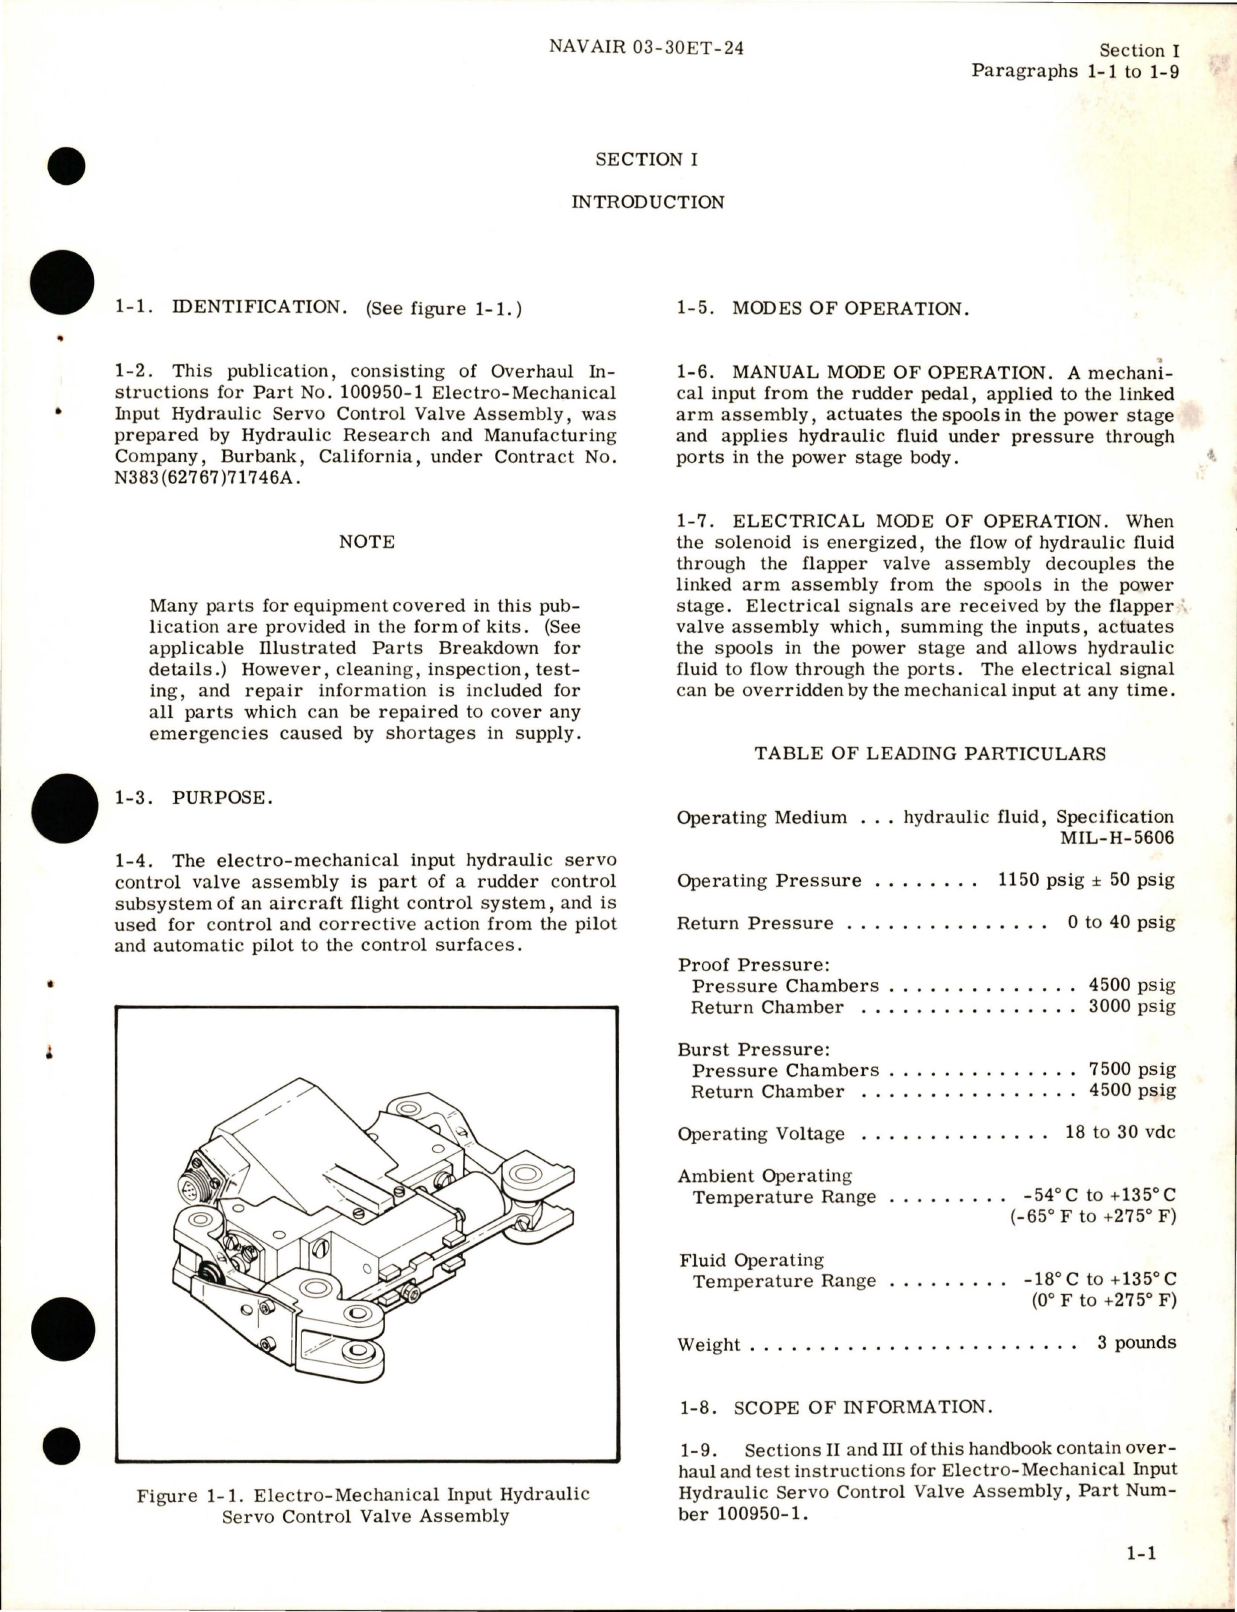 Sample page 5 from AirCorps Library document: Overhaul Instructions for Electro-Mechanical Input Hydraulic Servo Control Valve Assembly - Part 100950-1